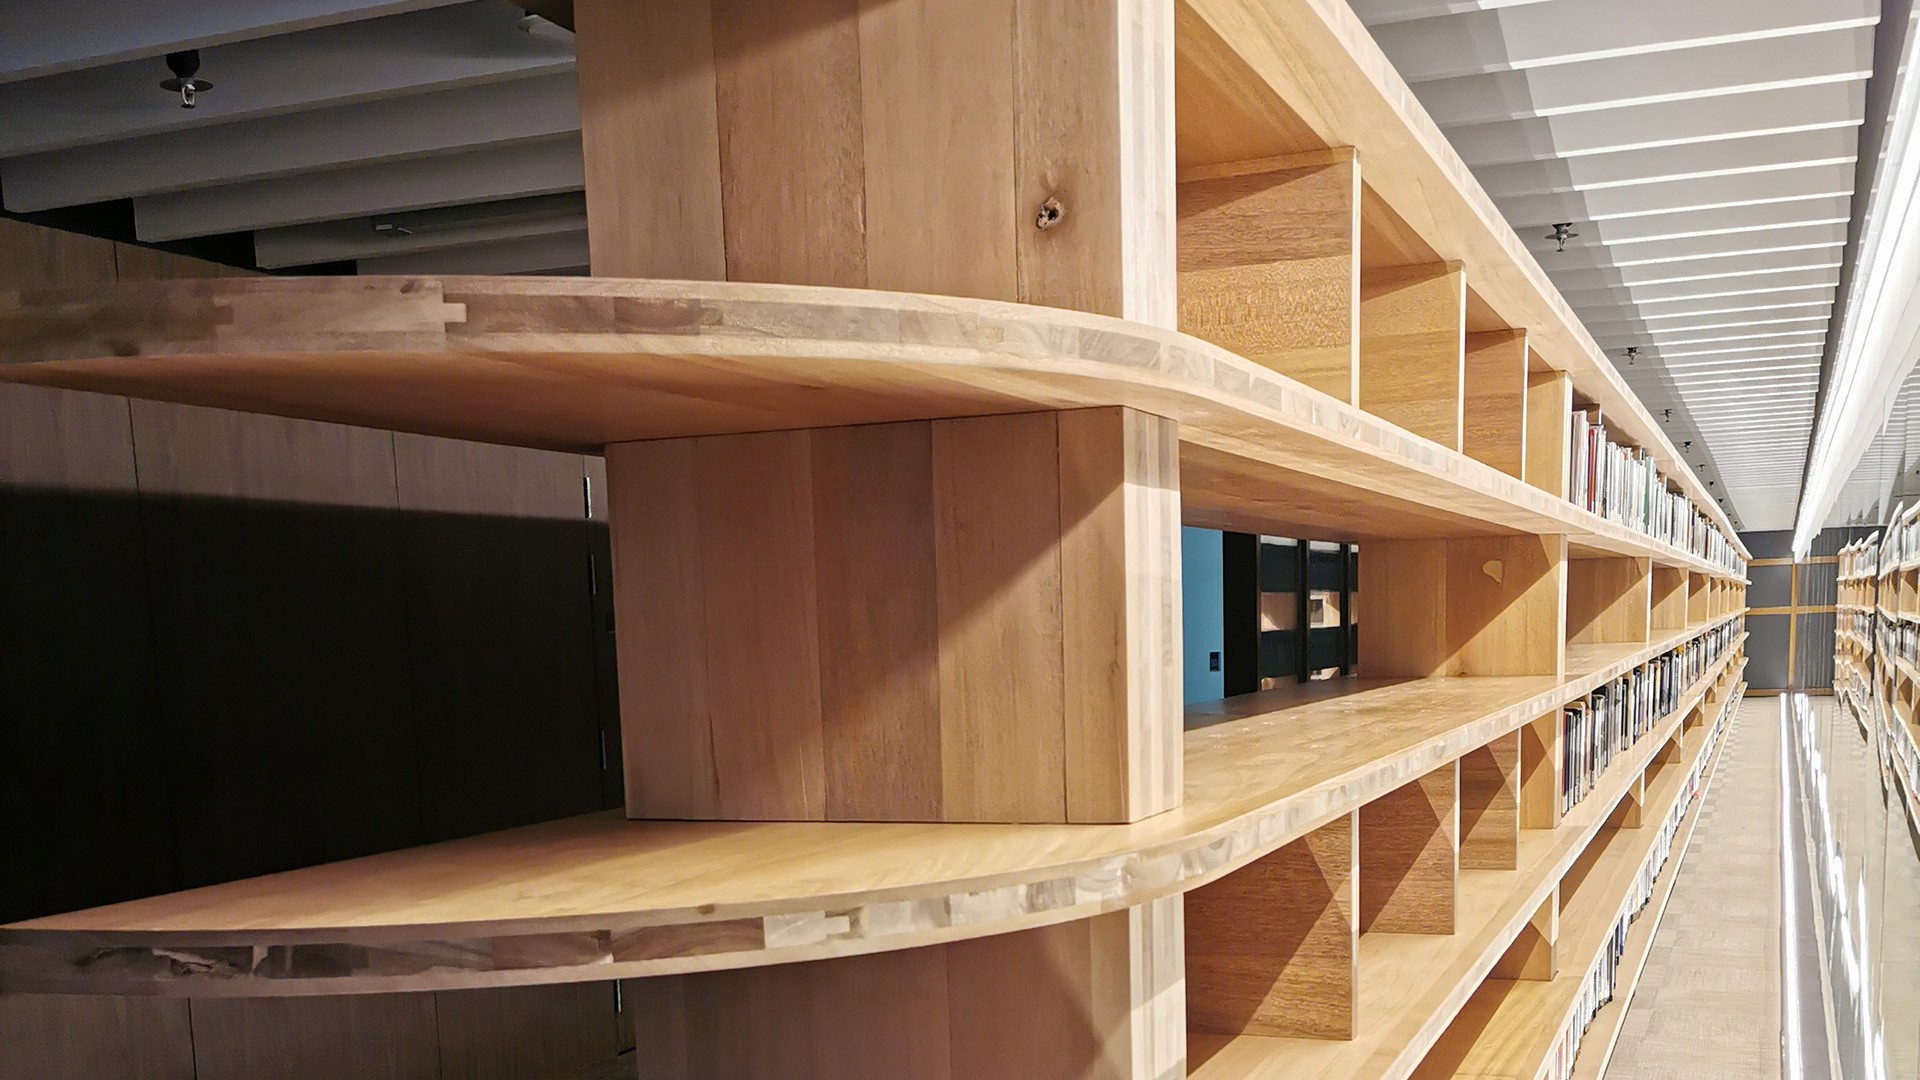 The BookBridge's three-layer composite shelves comprise acacia as inner layers and Forest Stewardship Council certified meranti wood as outer layers.